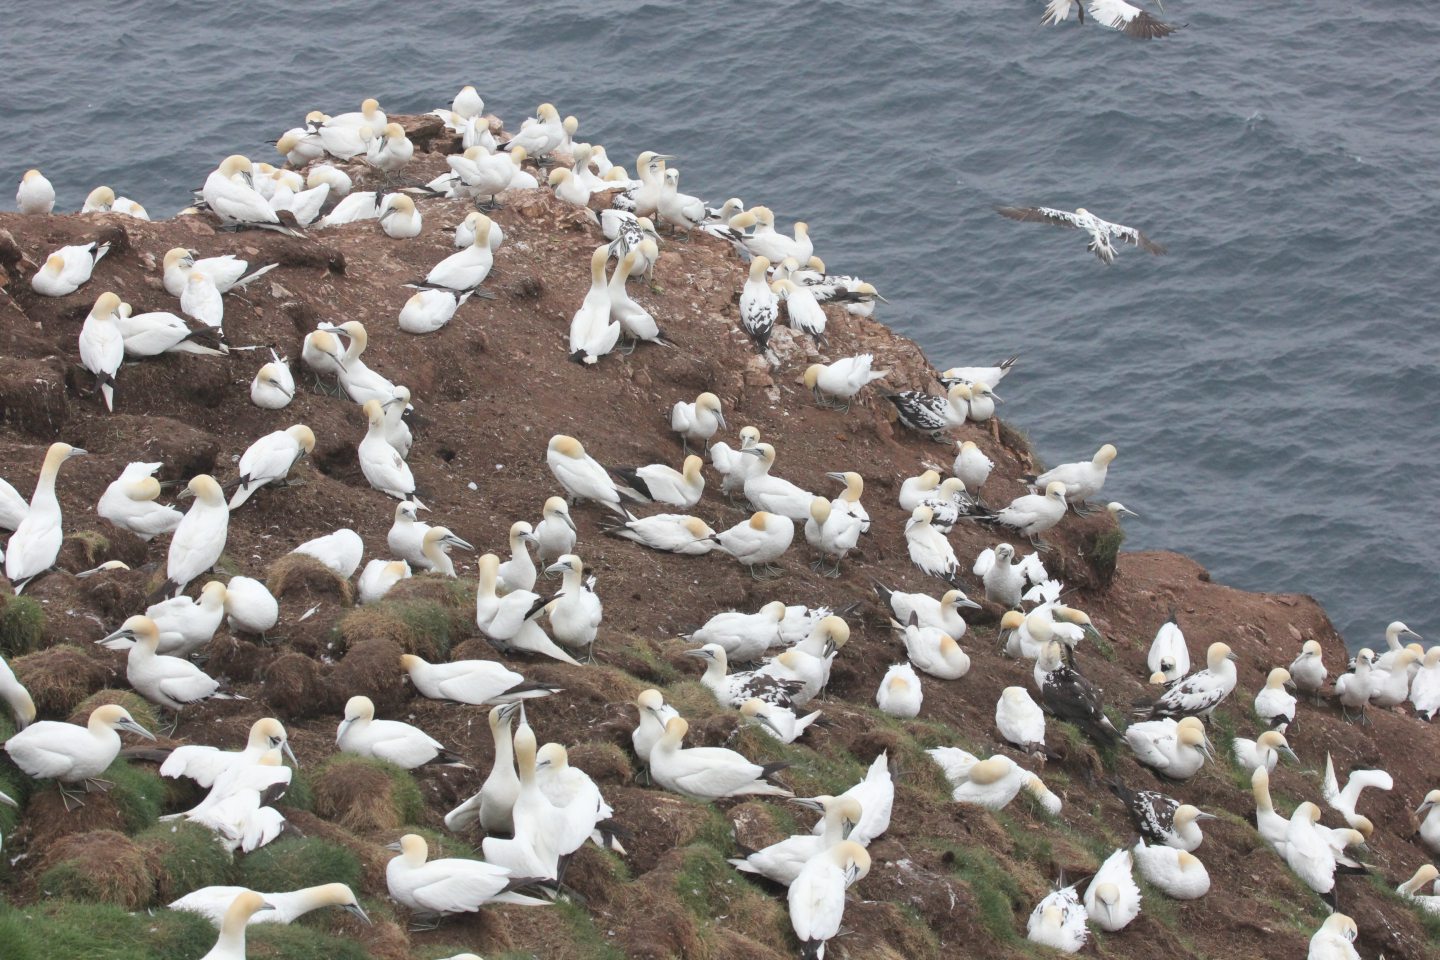 A gannet colony at Troup Head has been impacted by bird flu.